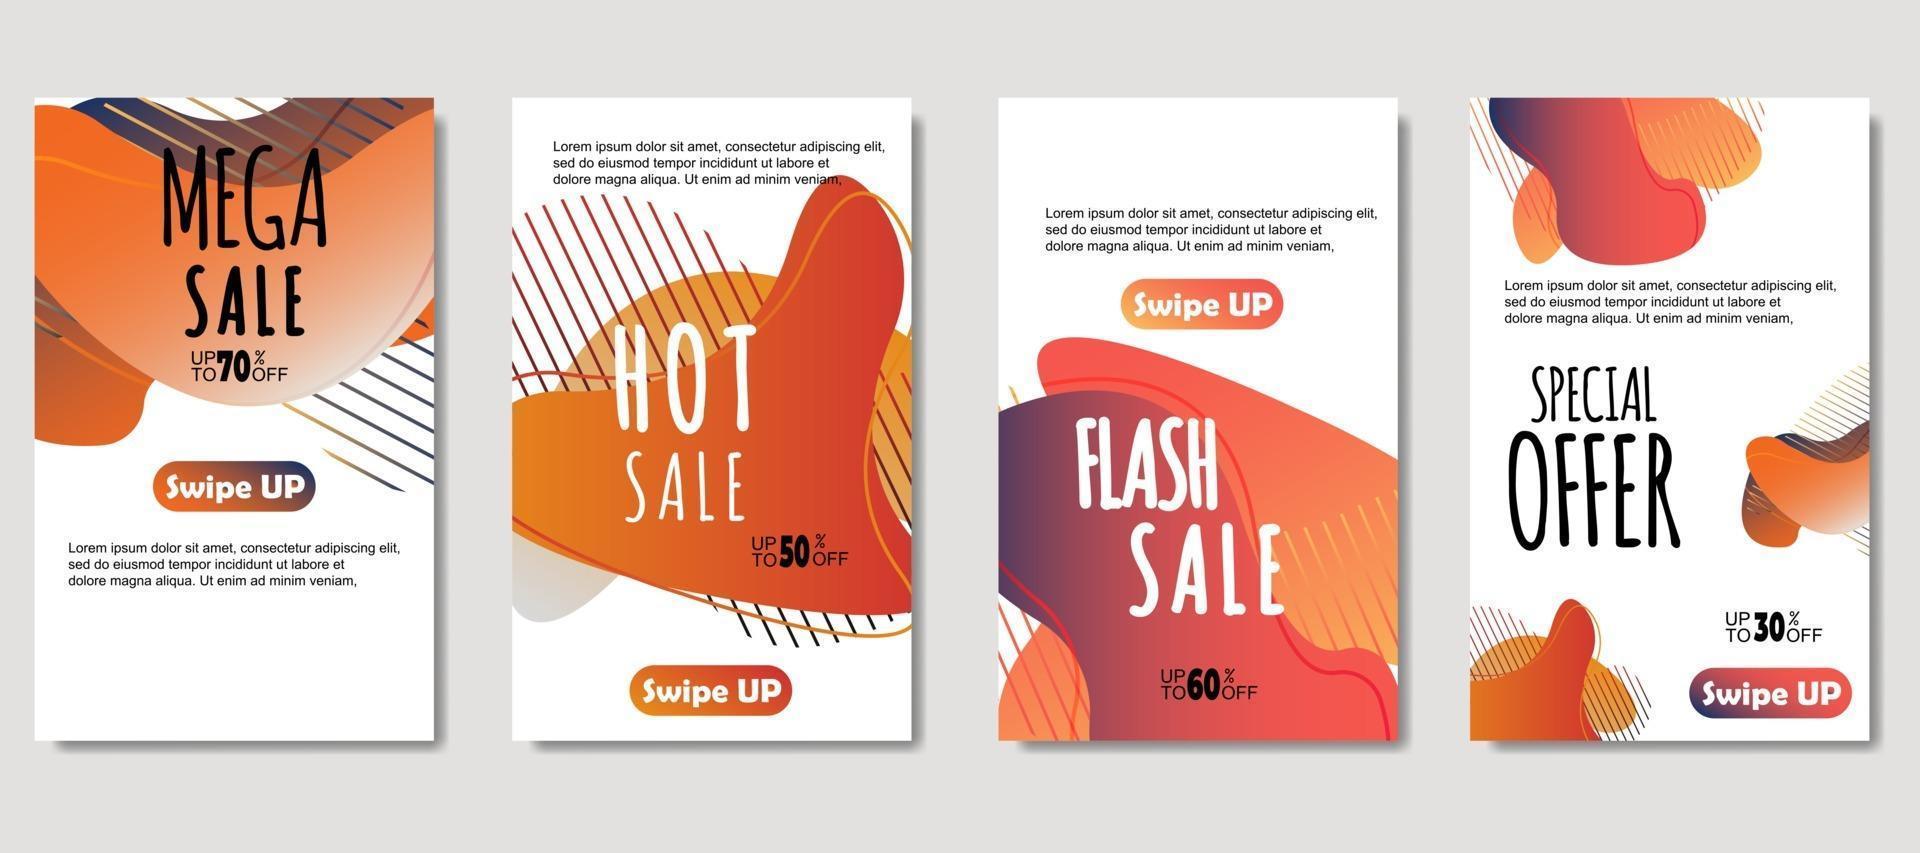 Dynamic abstract fluid mobile for sale banners. Sale banner template design, mega sale special offer set, design for flyer, gift card, poster on wall, cover book, banner, social media vector